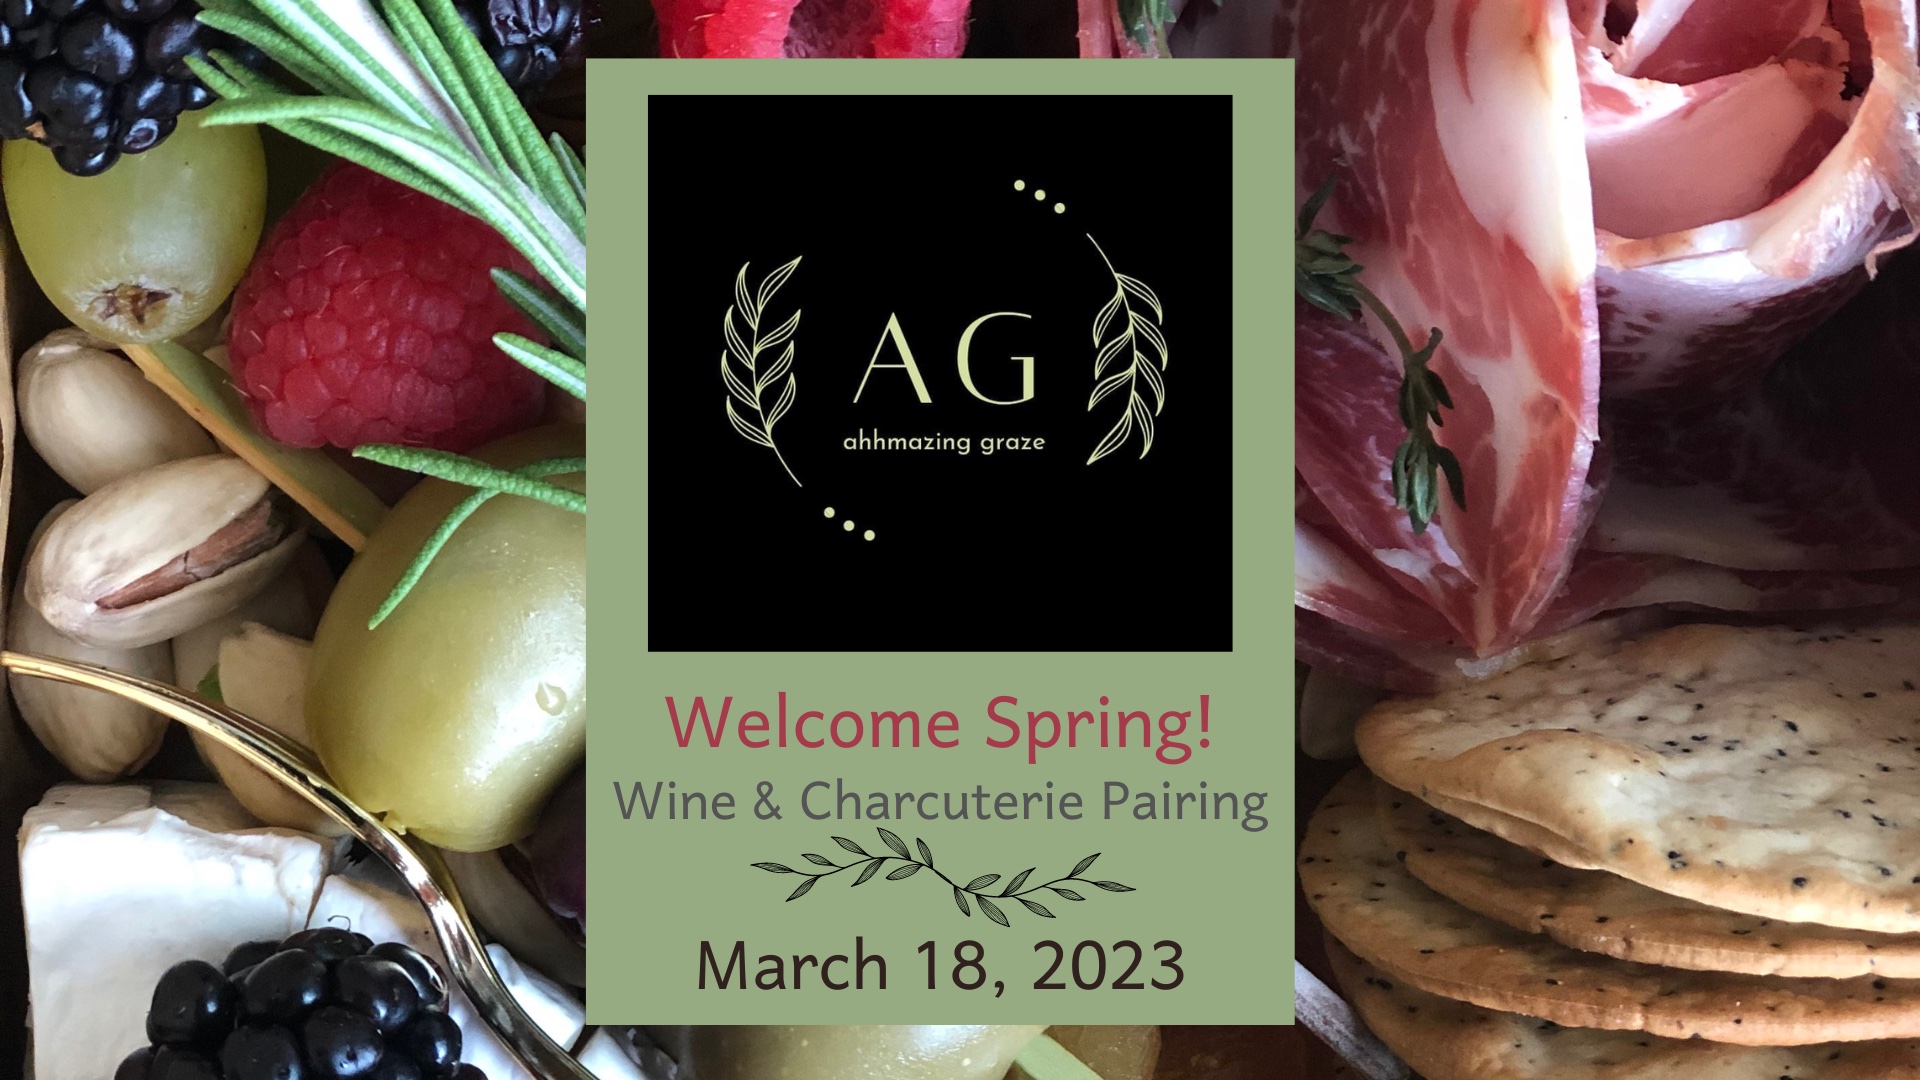 Wine & Charcuterie Pairing - March 18, 2023